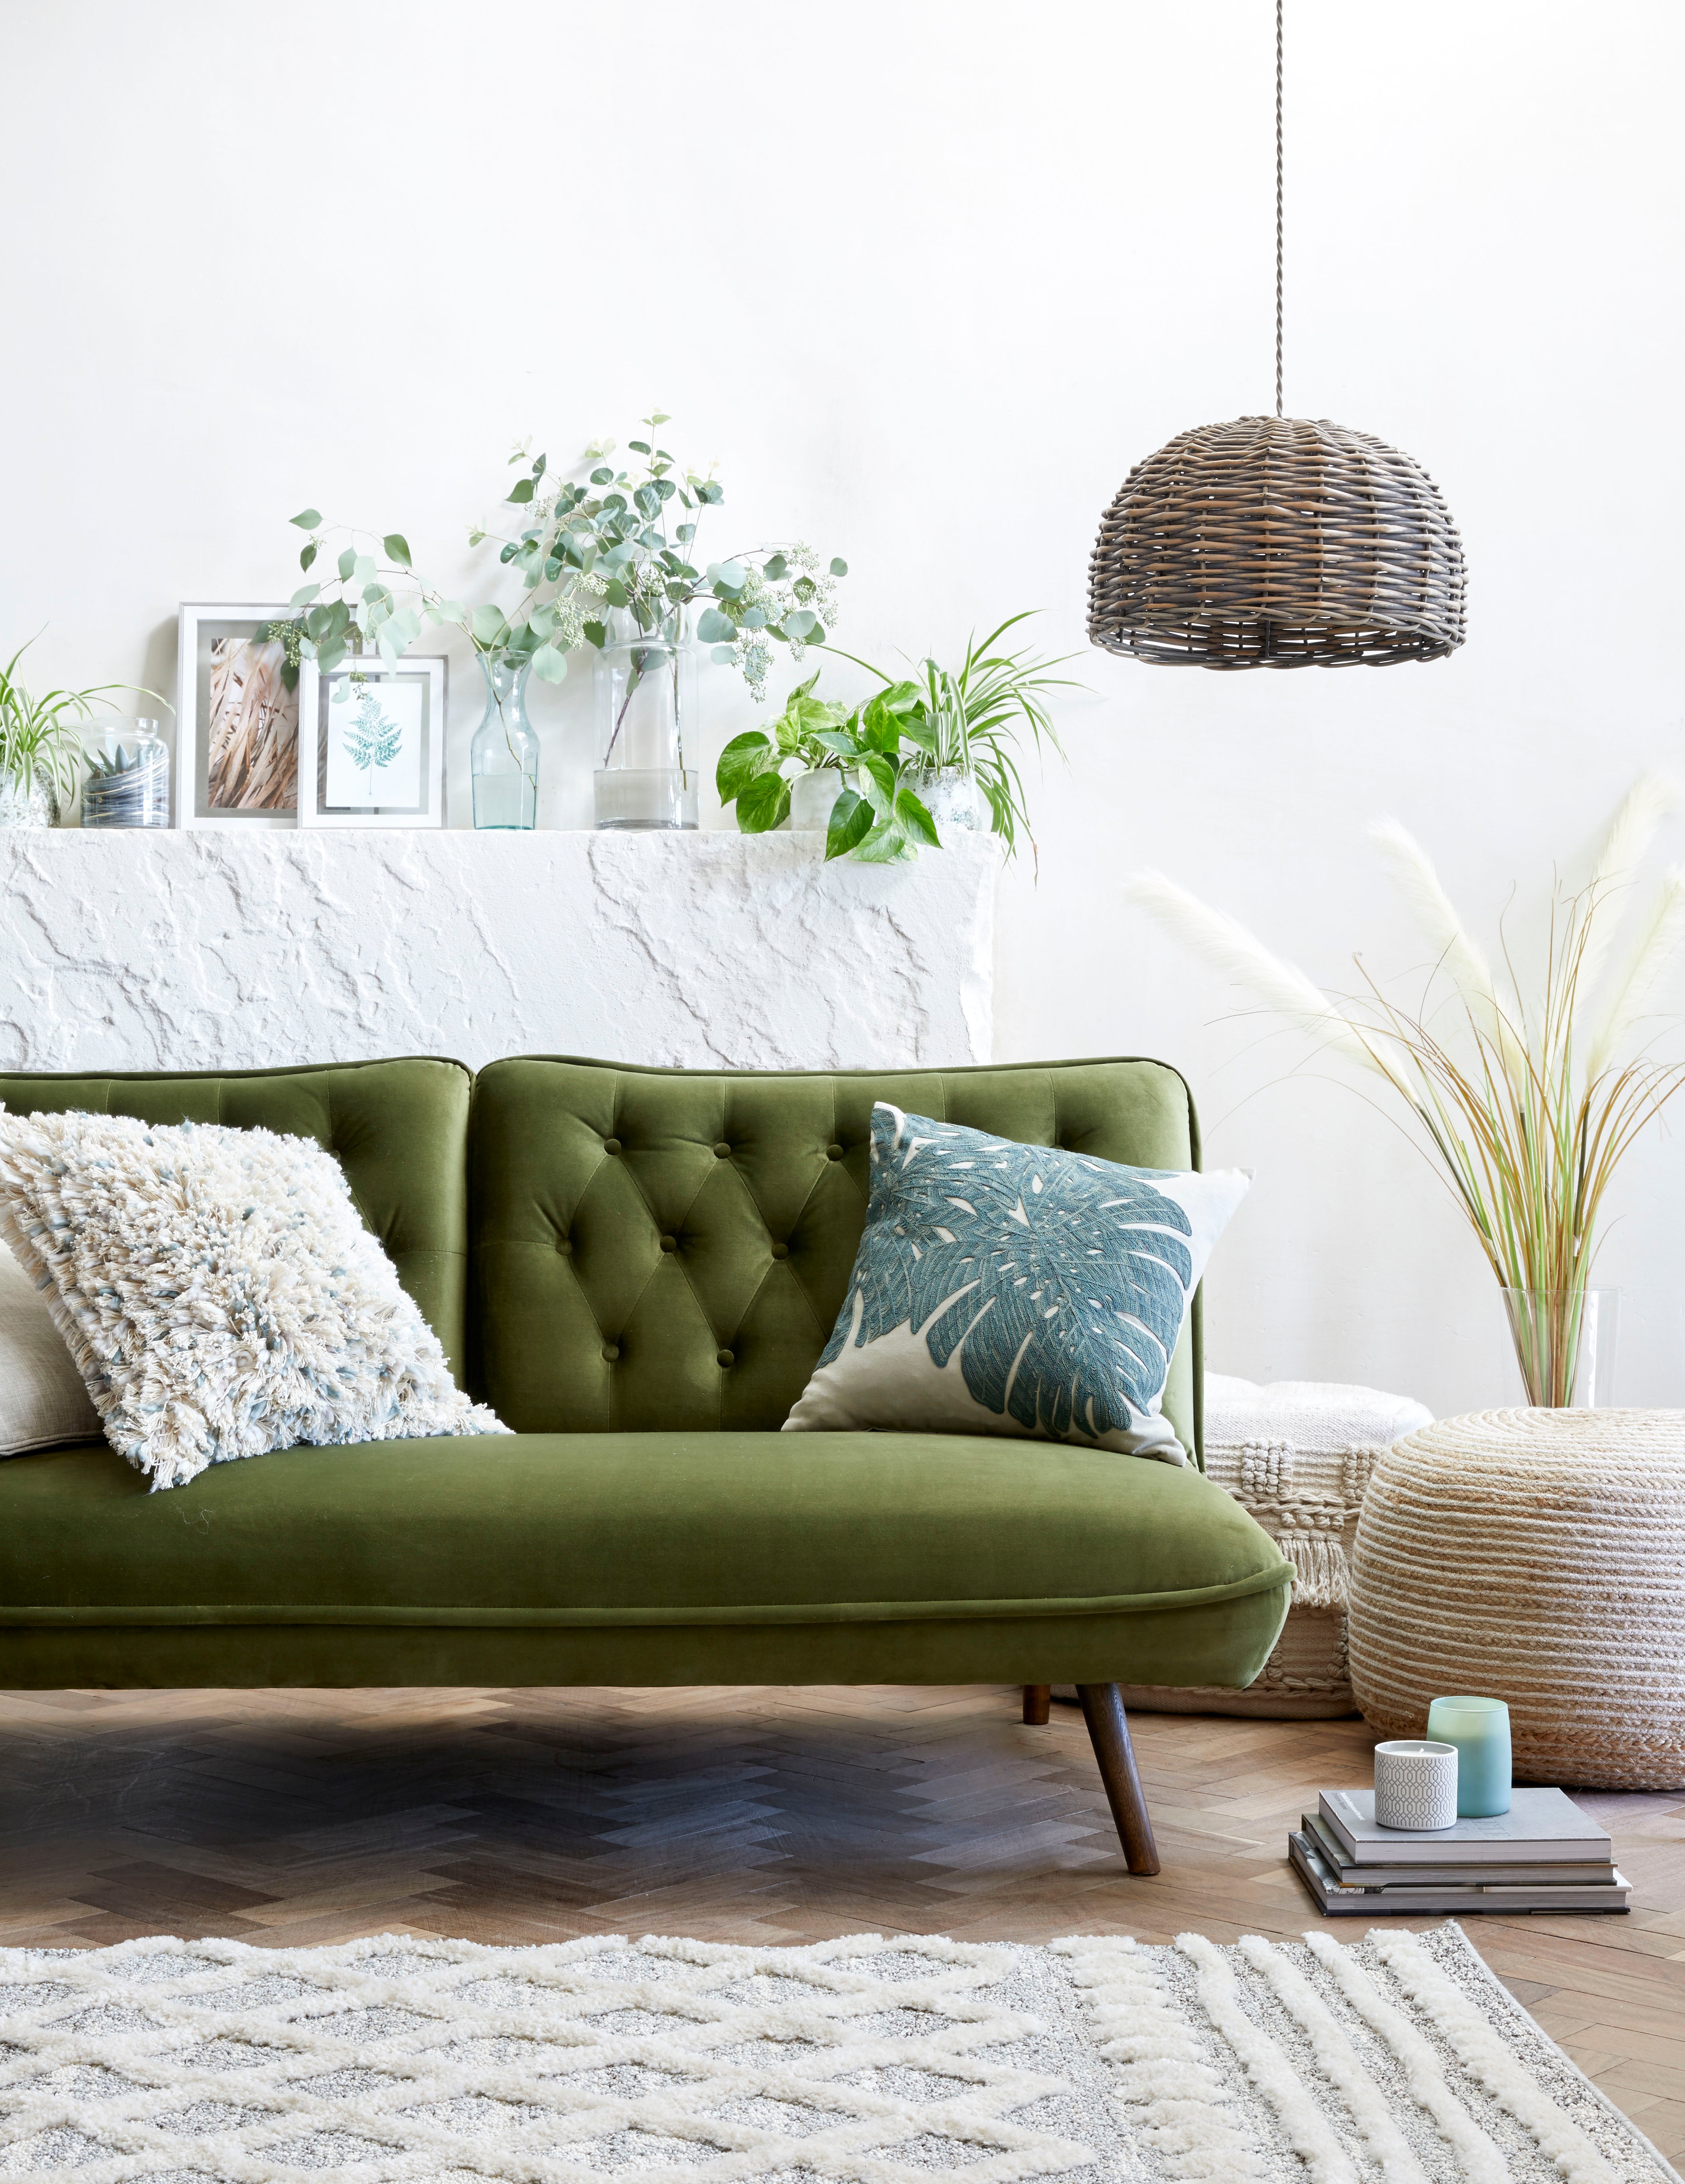 Dunelm is set to show a surge in sales for the past year despite store closures (Dunelm/PA)